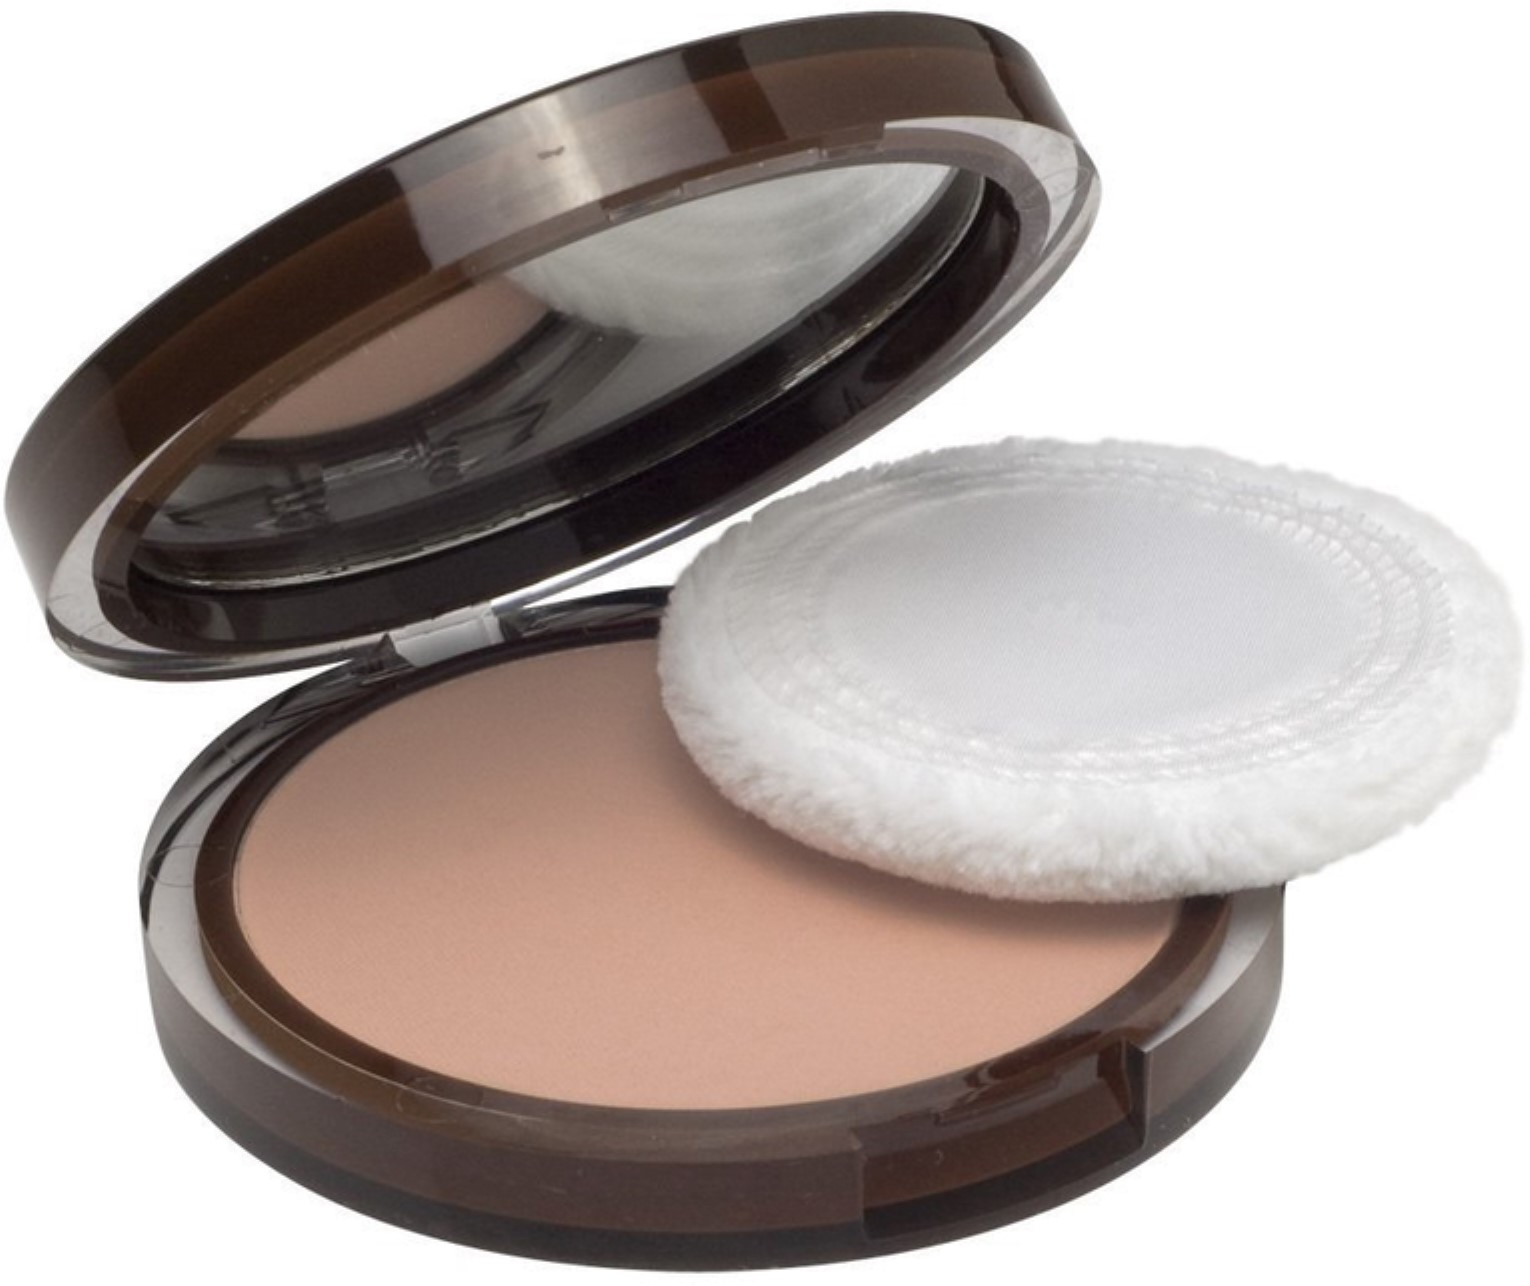 CoverGirl Clean Pressed Powder Compact, Medium Light [135], 0.39 oz (Pack of 4) - image 1 of 1